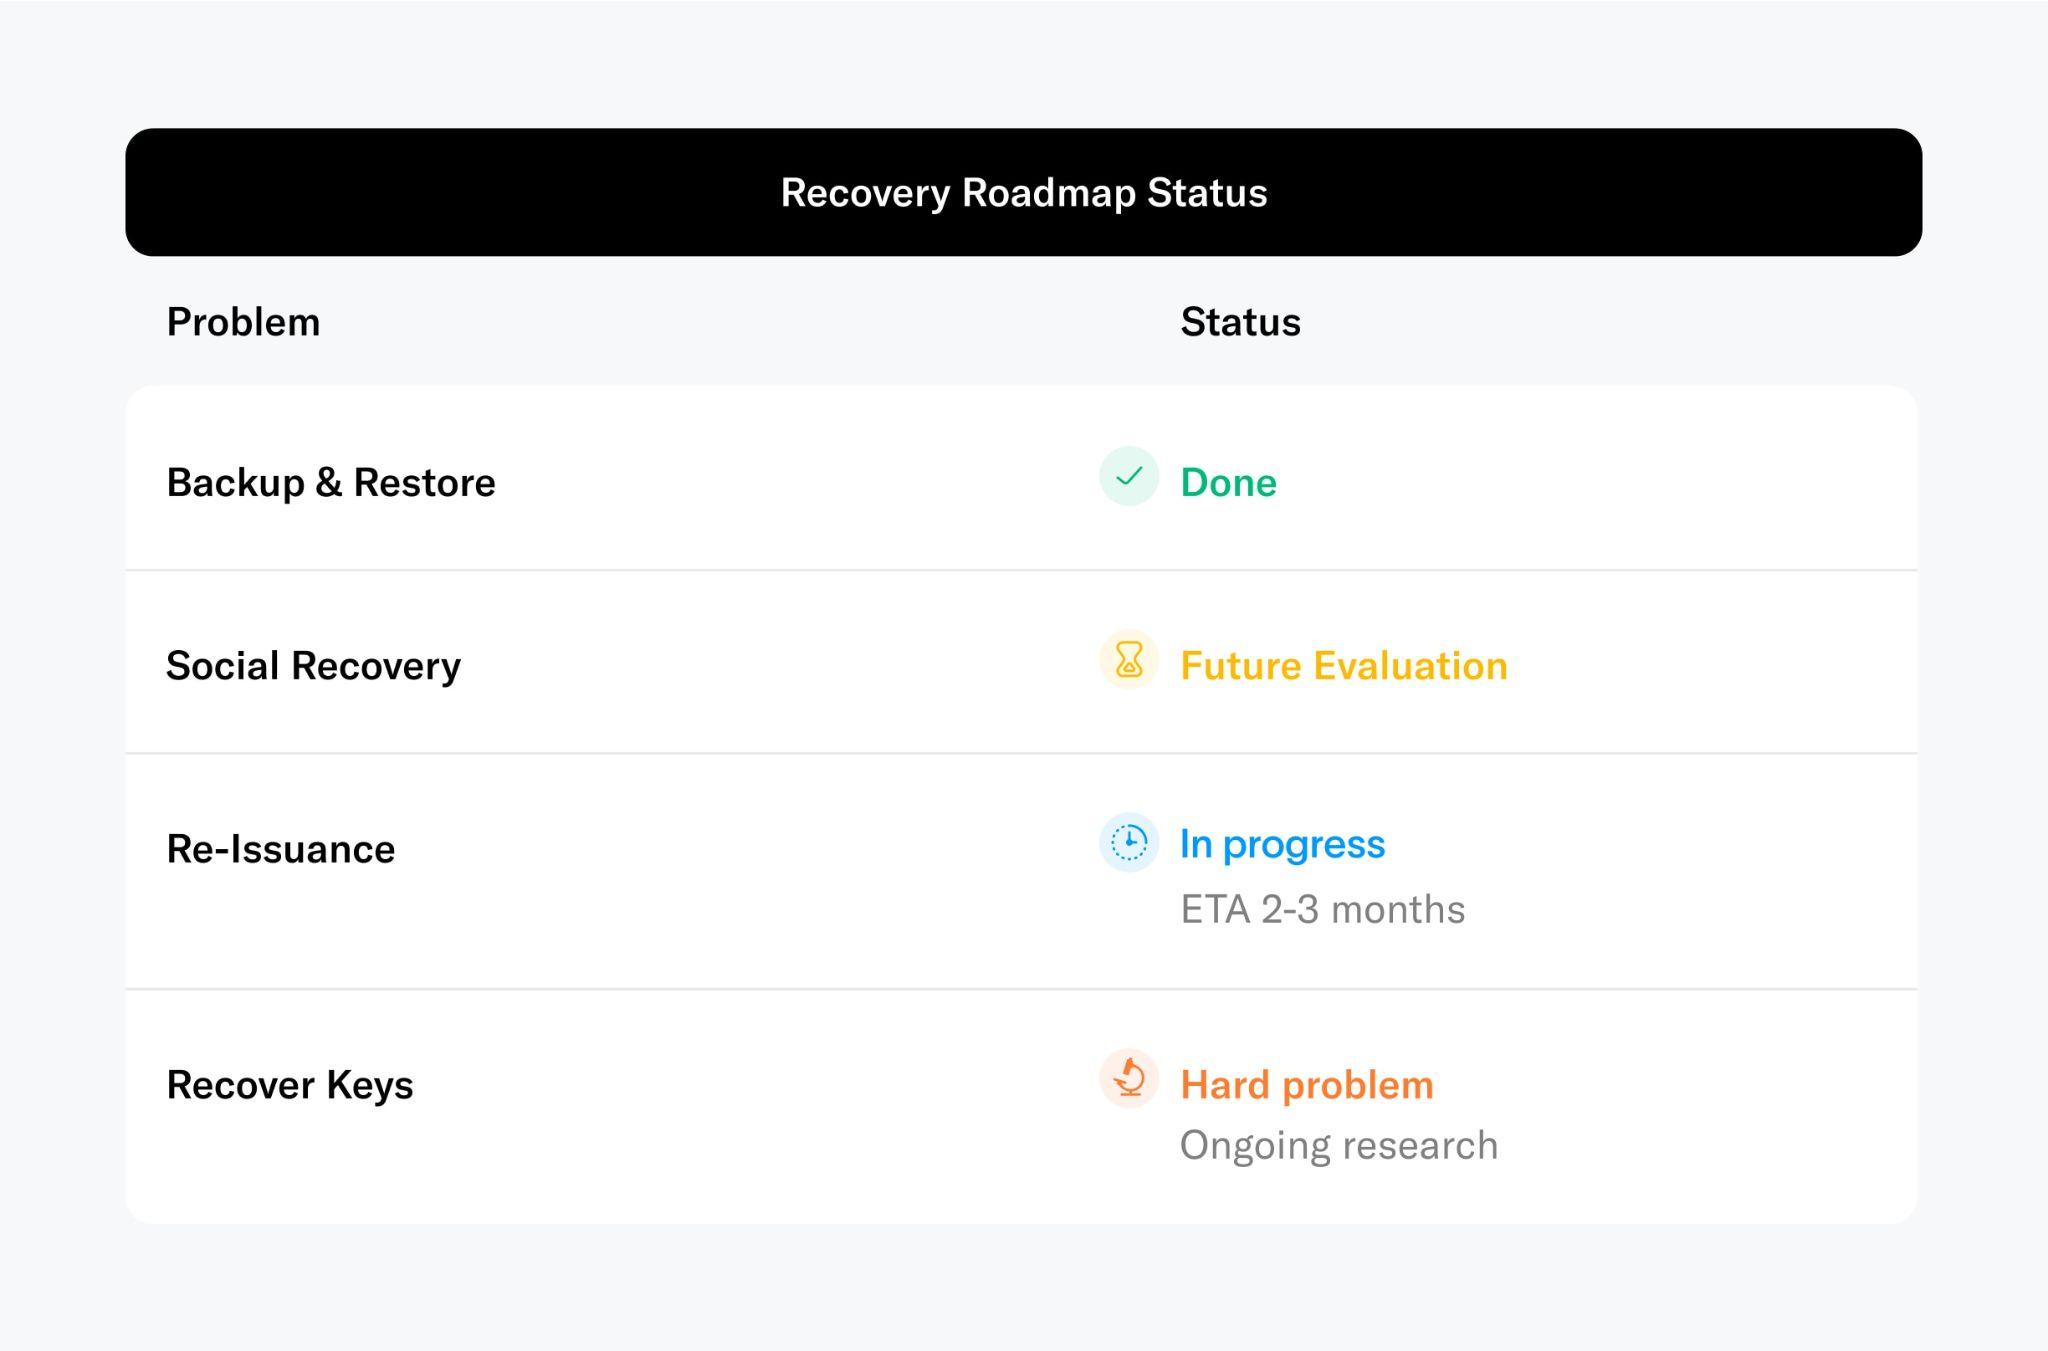 Figure 11: There are several ways to recover someone’s World ID. The easiest way is to create and restore a backup. If no backup is available, the World ID can be restored via re-issuance which is on the roadmap for the next 2-3 months. To implement biometric key recovery in a safe and privacy-preserving manner, several open research questions would need to be solved. It is therefore currently unclear if biometric key recovery will be possible.